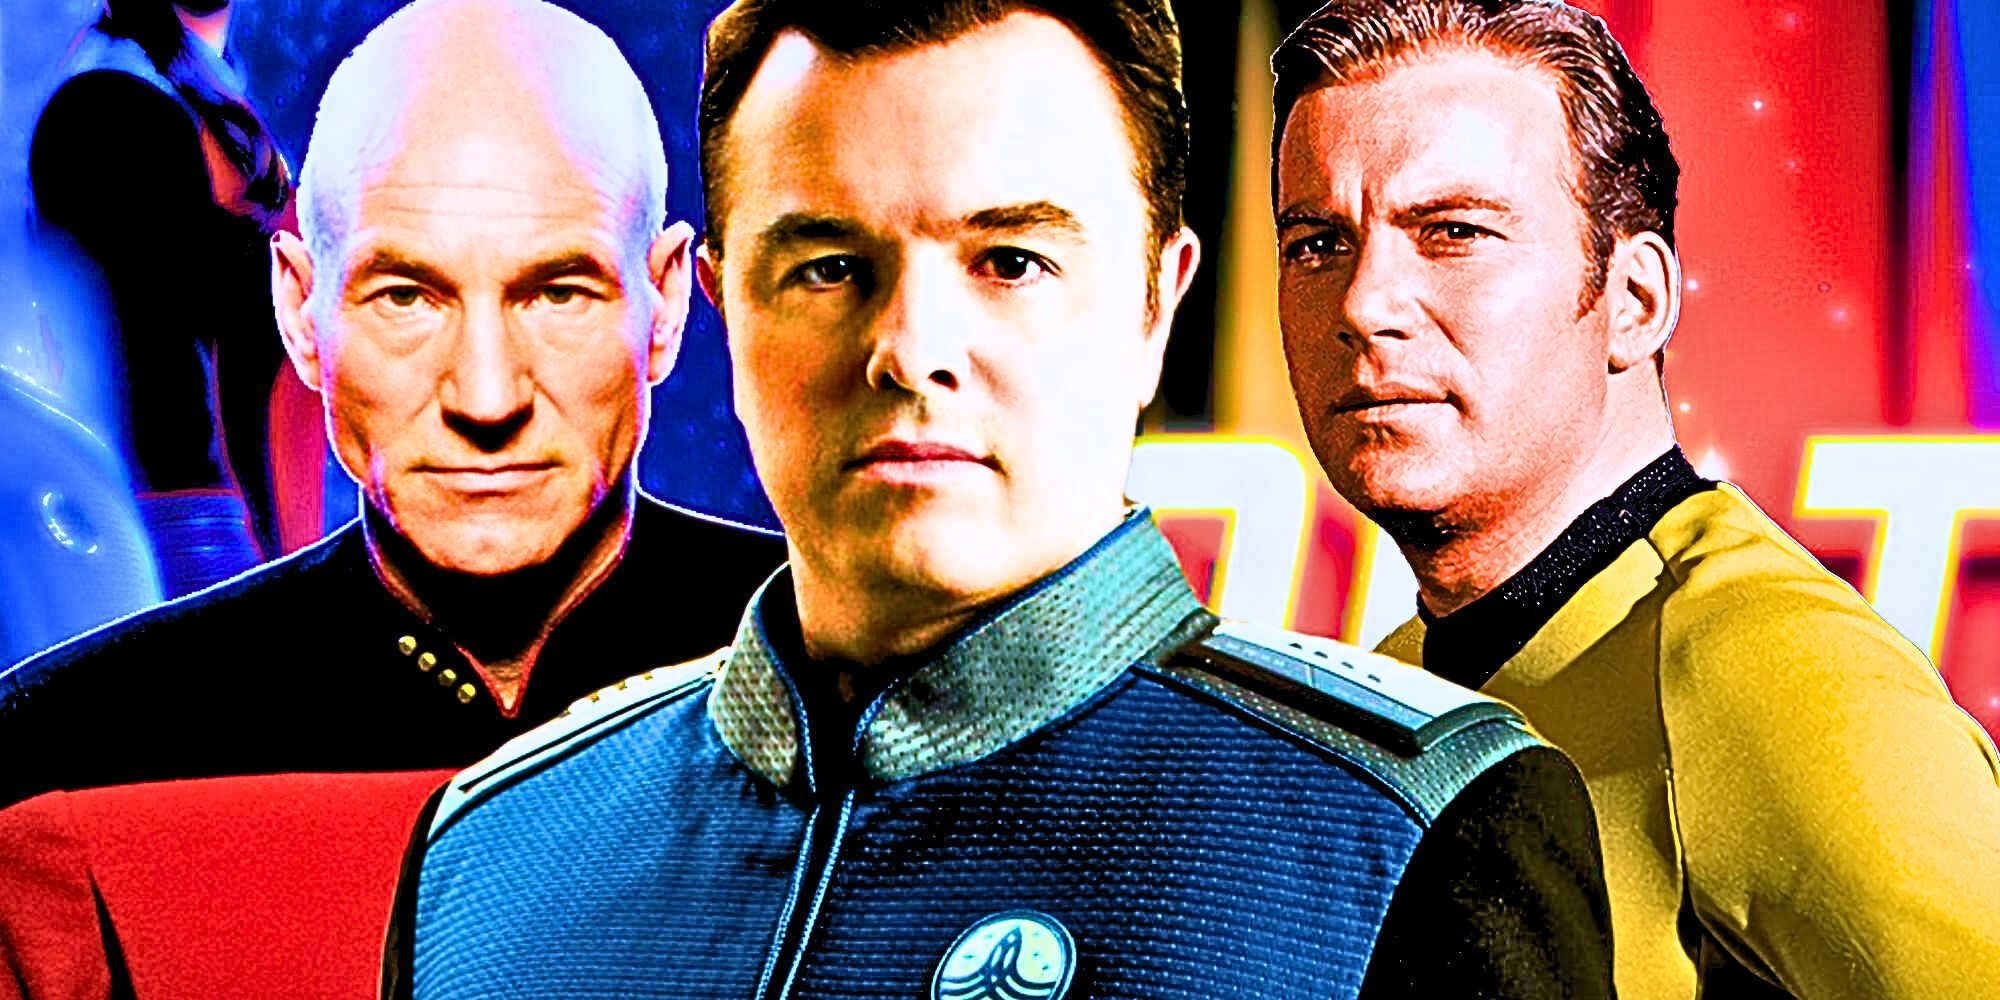 A custom image of Patrick Stewart as Jean-Luc Picard, Seth MacFarlane as Ed Mercer and William Shatner as Captain Kirk against a backdrop of Star Trek and The Orville imagery